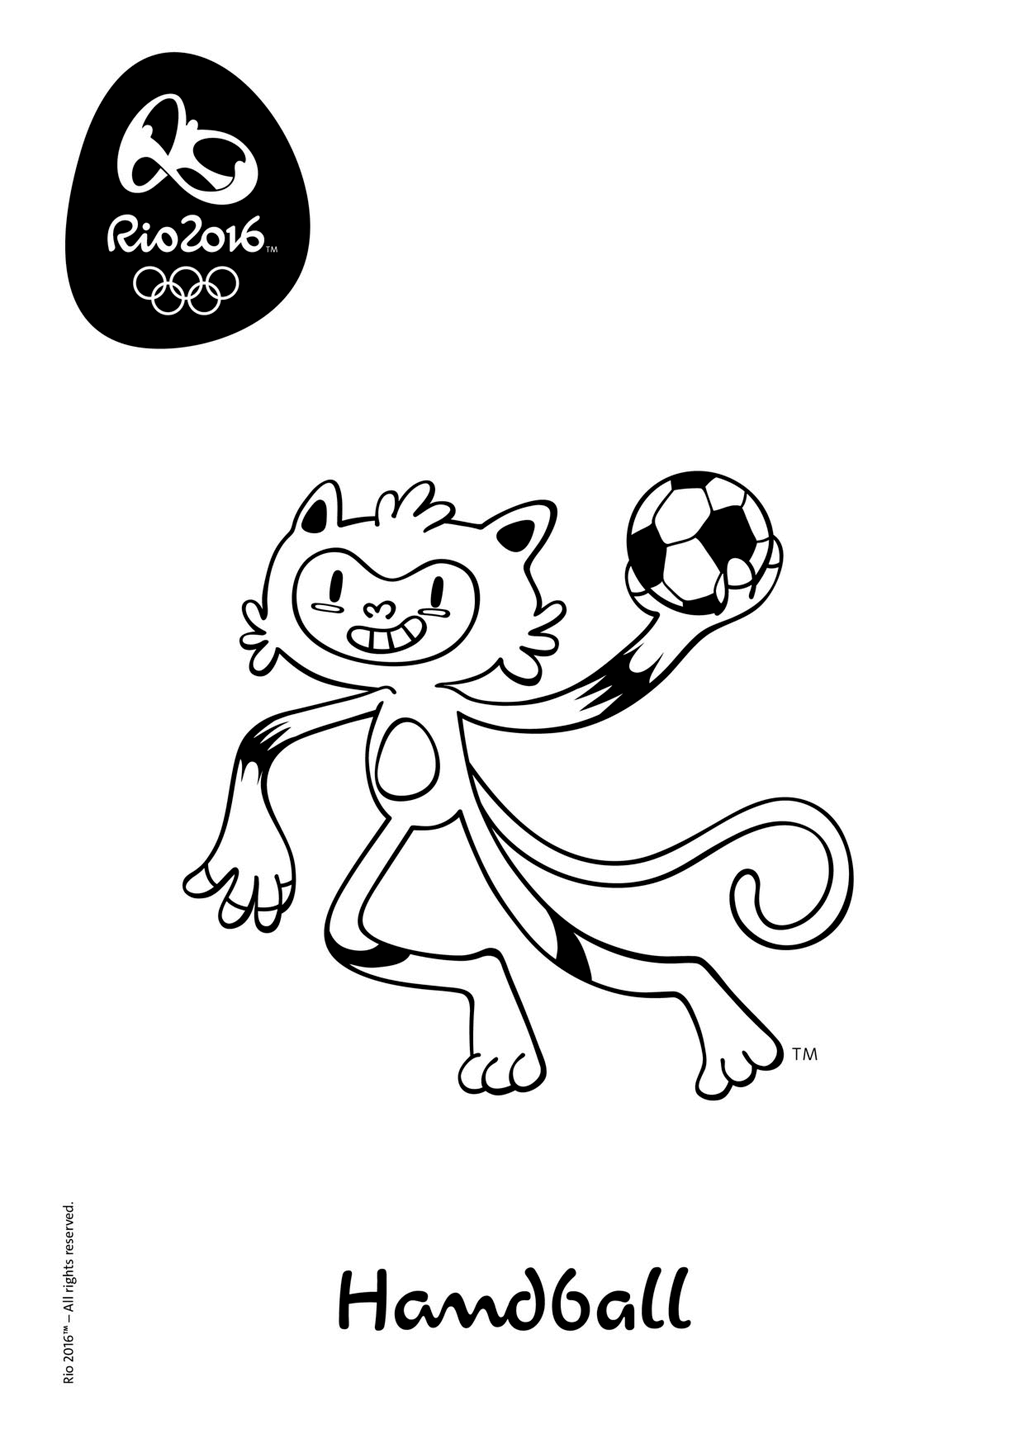 olympic handball coloring pages